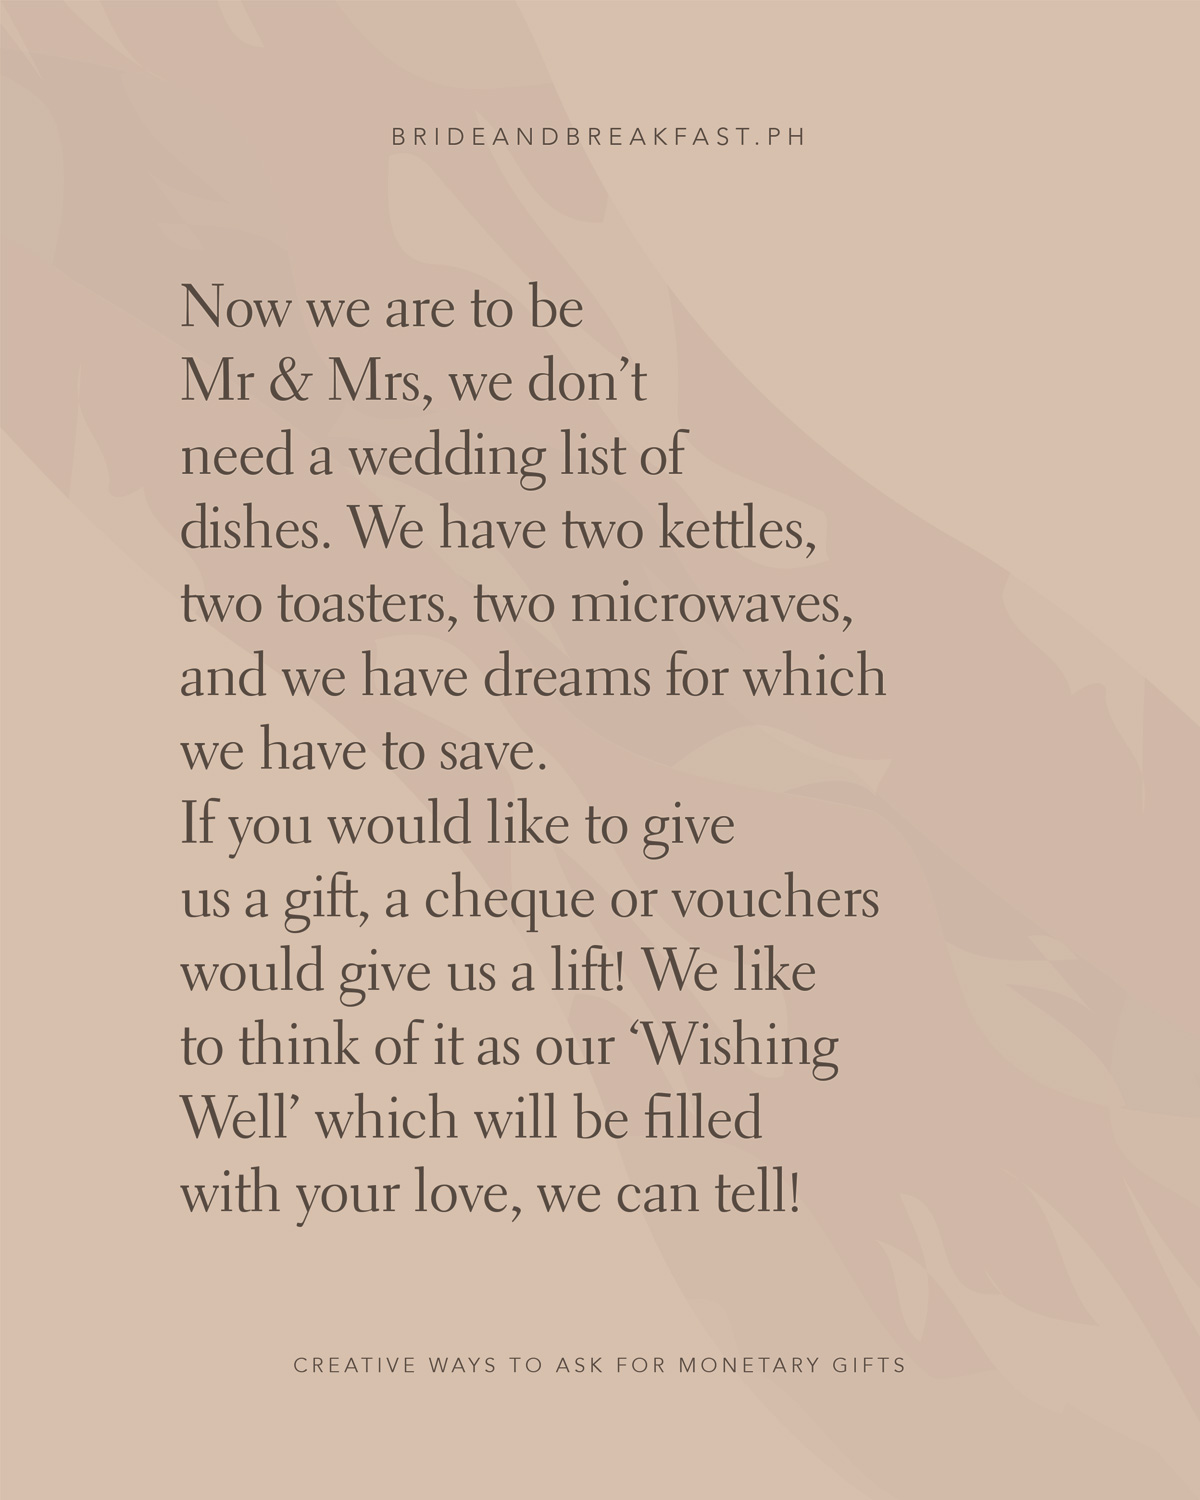 Now we are to be Mr & Mrs We don’t need a wedding list of dishes We have two kettles, two toasters, two microwaves And we have dreams for which we have to save. If you would like to give us a gift A cheque or vouchers would give us a lift We like to think of it as our ‘Wishing Well’ Which will be filled with your love, we can tell!